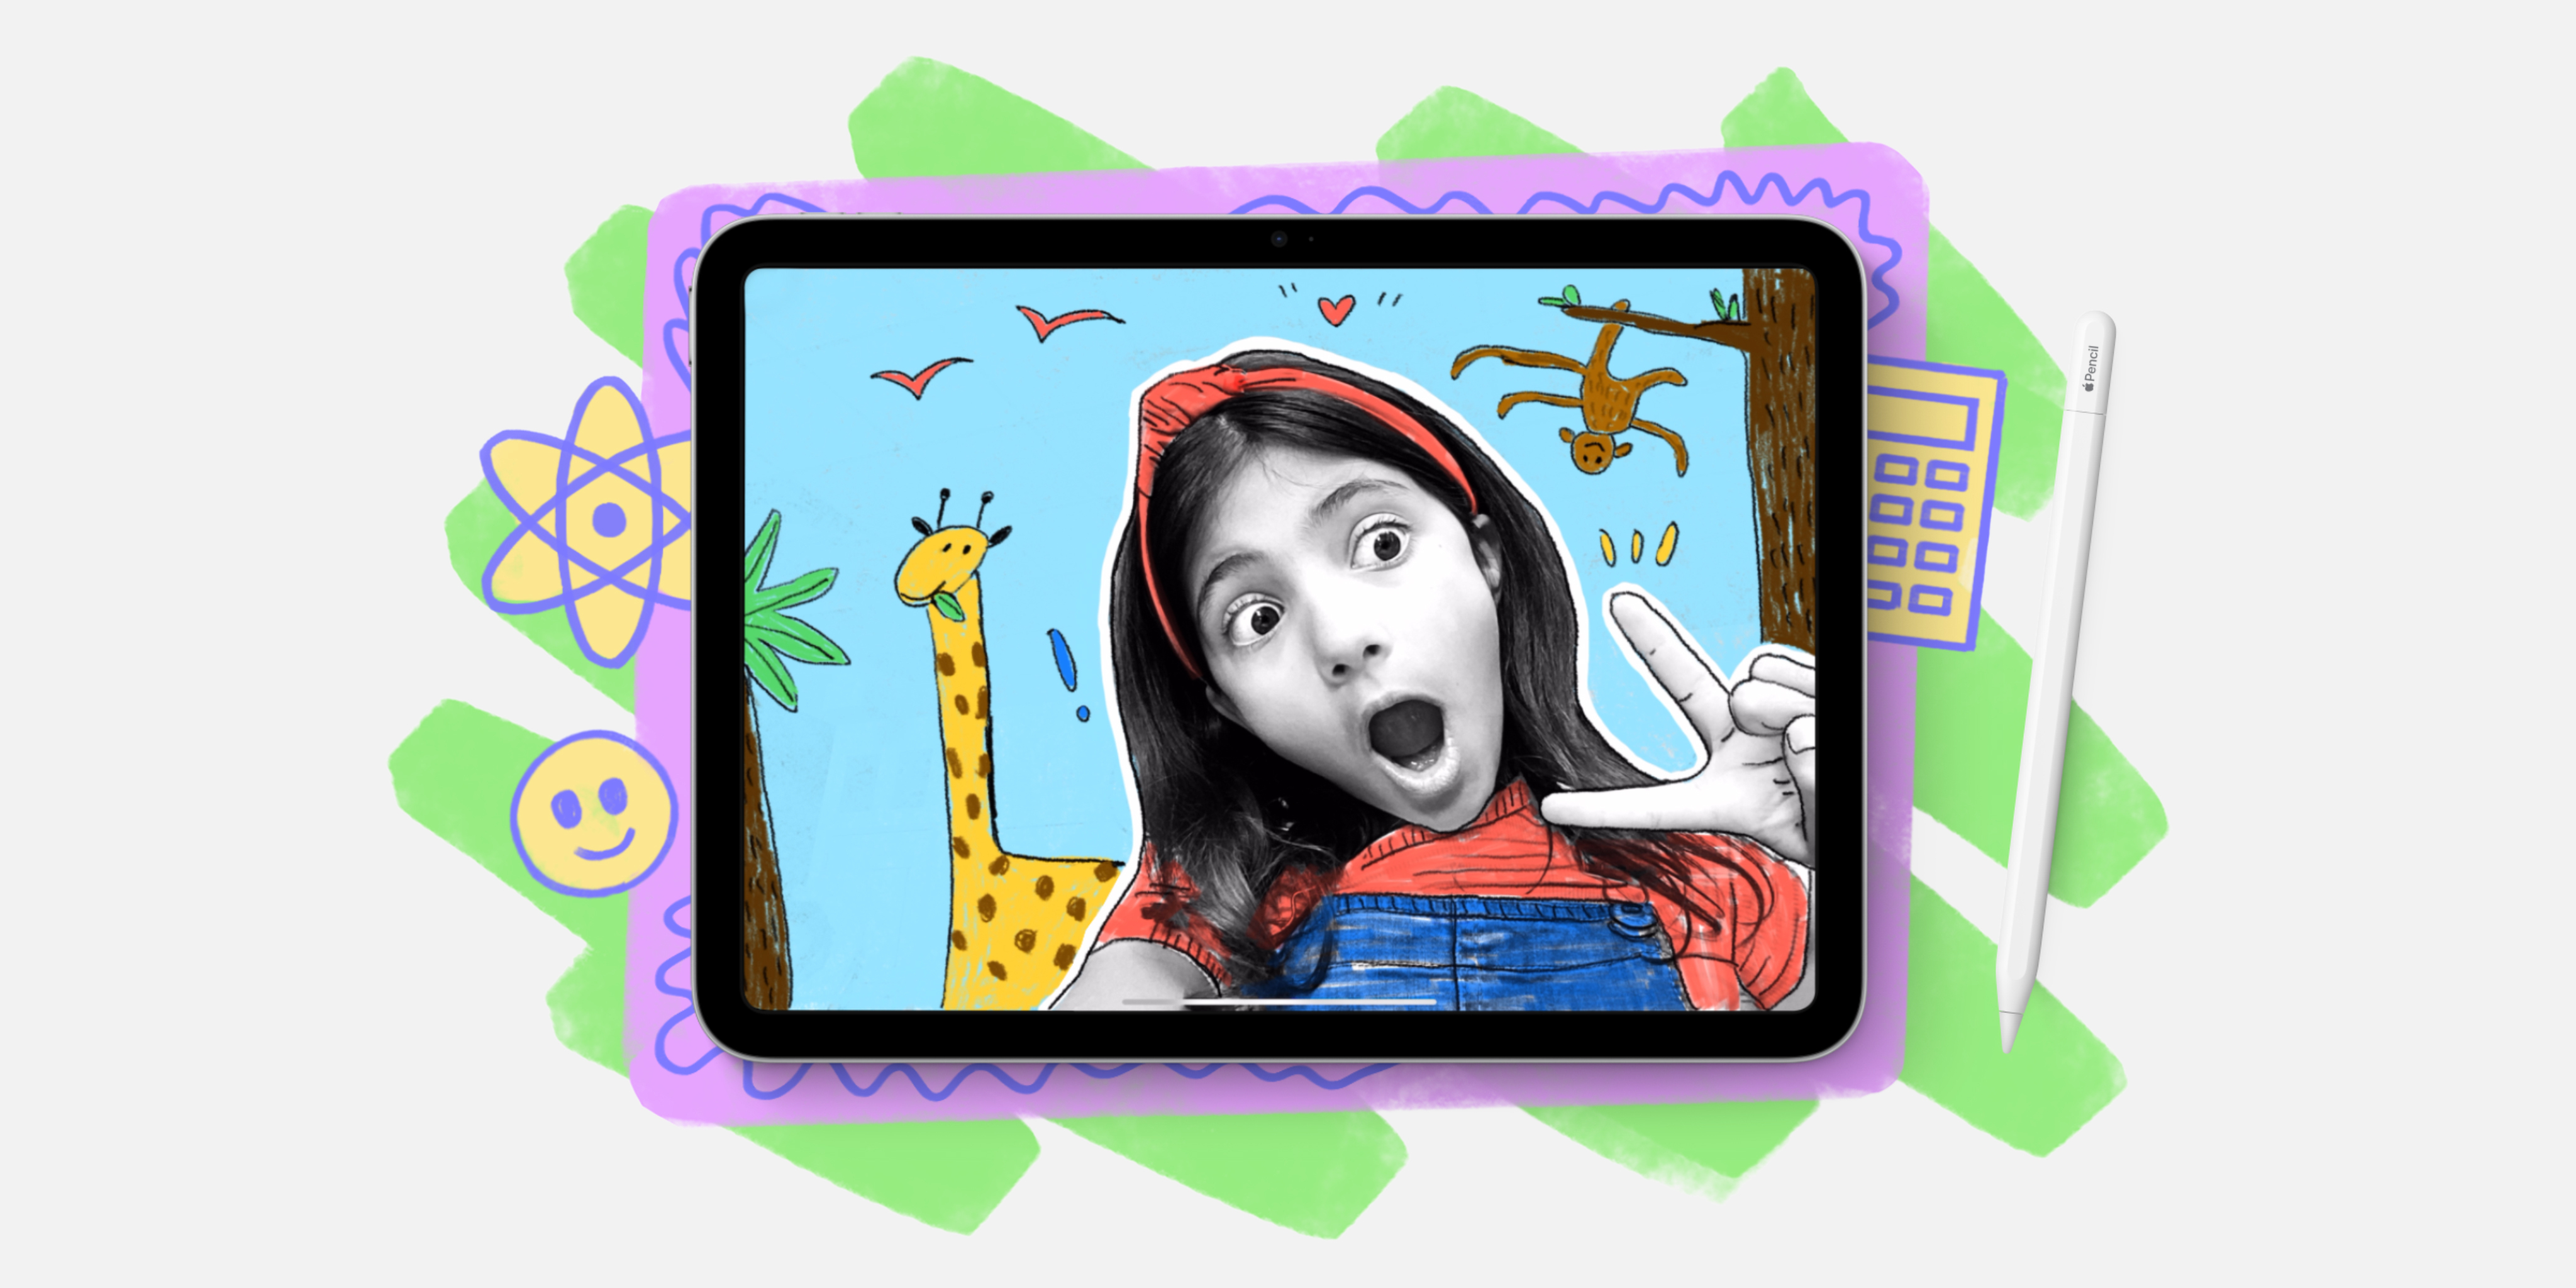 A selfie of an elementary girl framed on an iPad and turned into colorful pop art using Create Pop Art project from Apple.